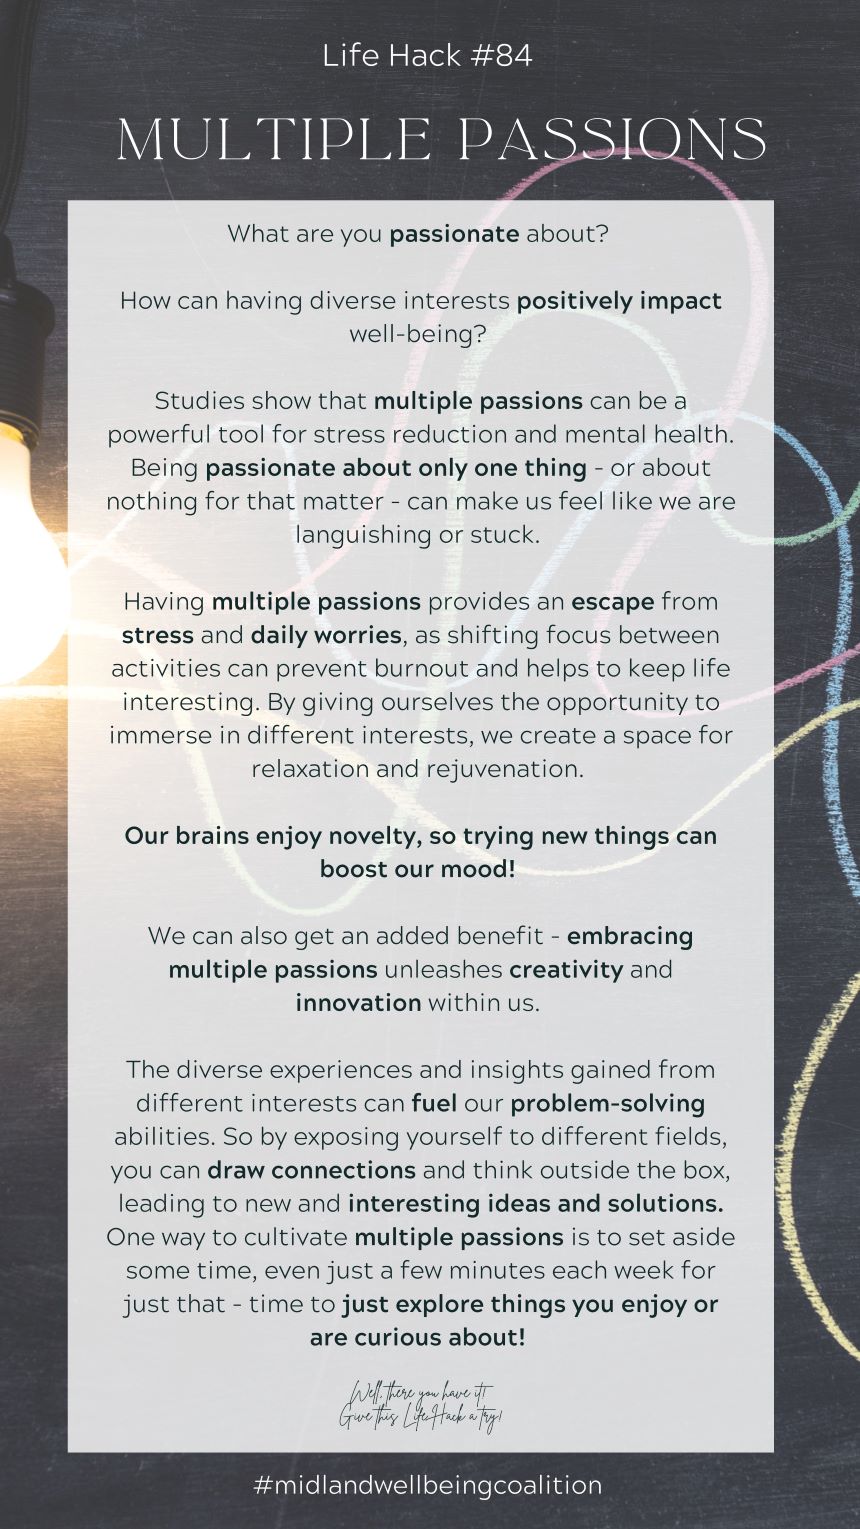 Life Hack #84: Multiple Passions from the Midland Area Wellbeing Coalition in Midland, MI.